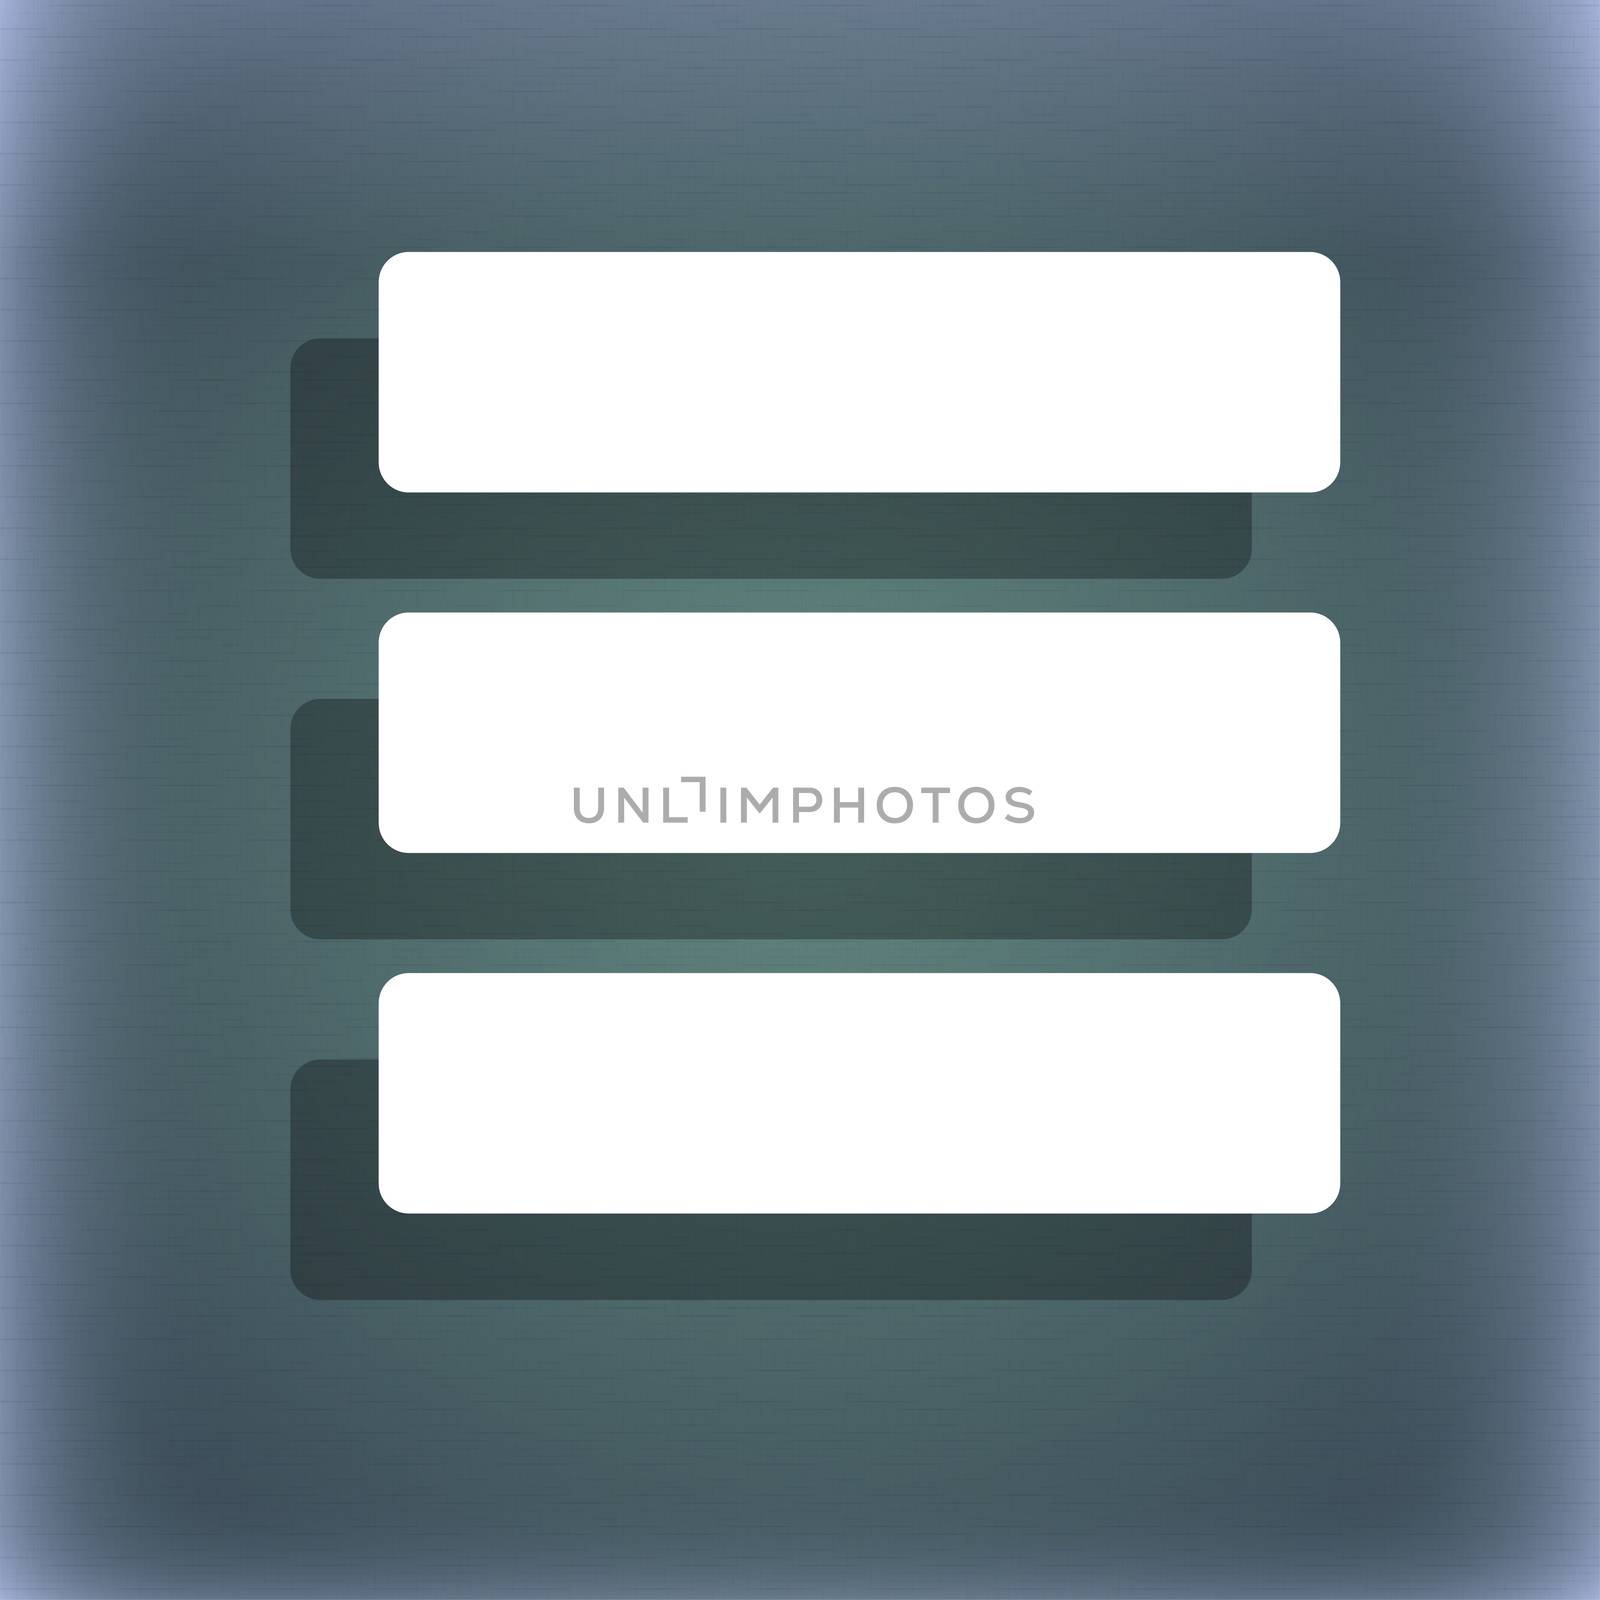 List menu, Content view options icon symbol on the blue-green abstract background with shadow and space for your text. illustration